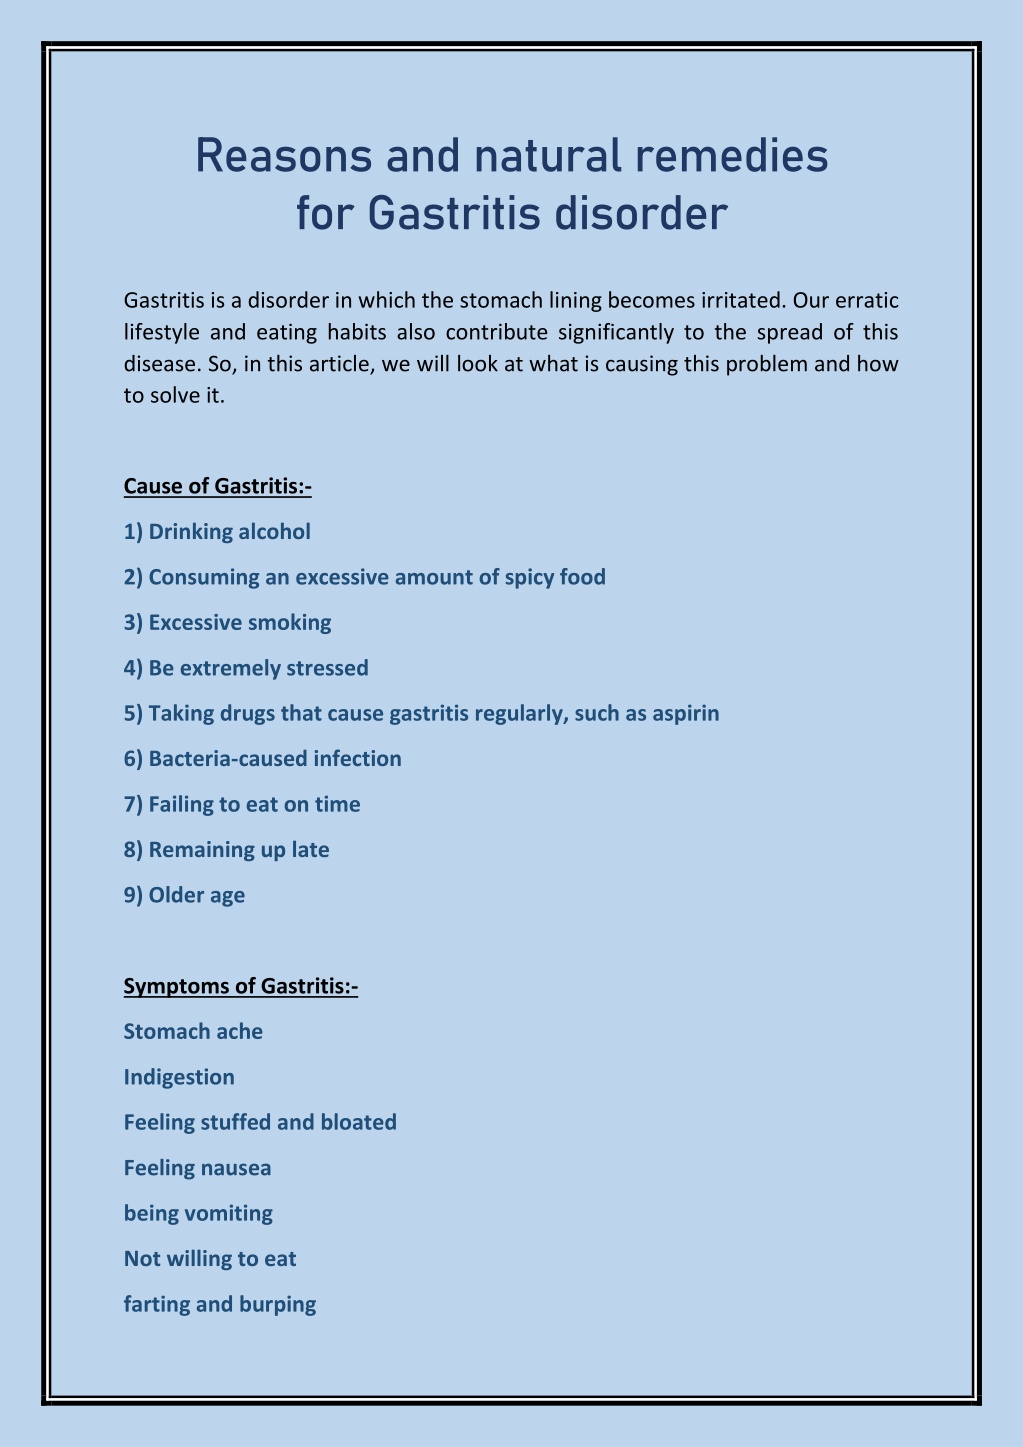 Ppt Reasons And Natural Remedies For Gastritis Disorder Powerpoint Presentation Id11836401 4117